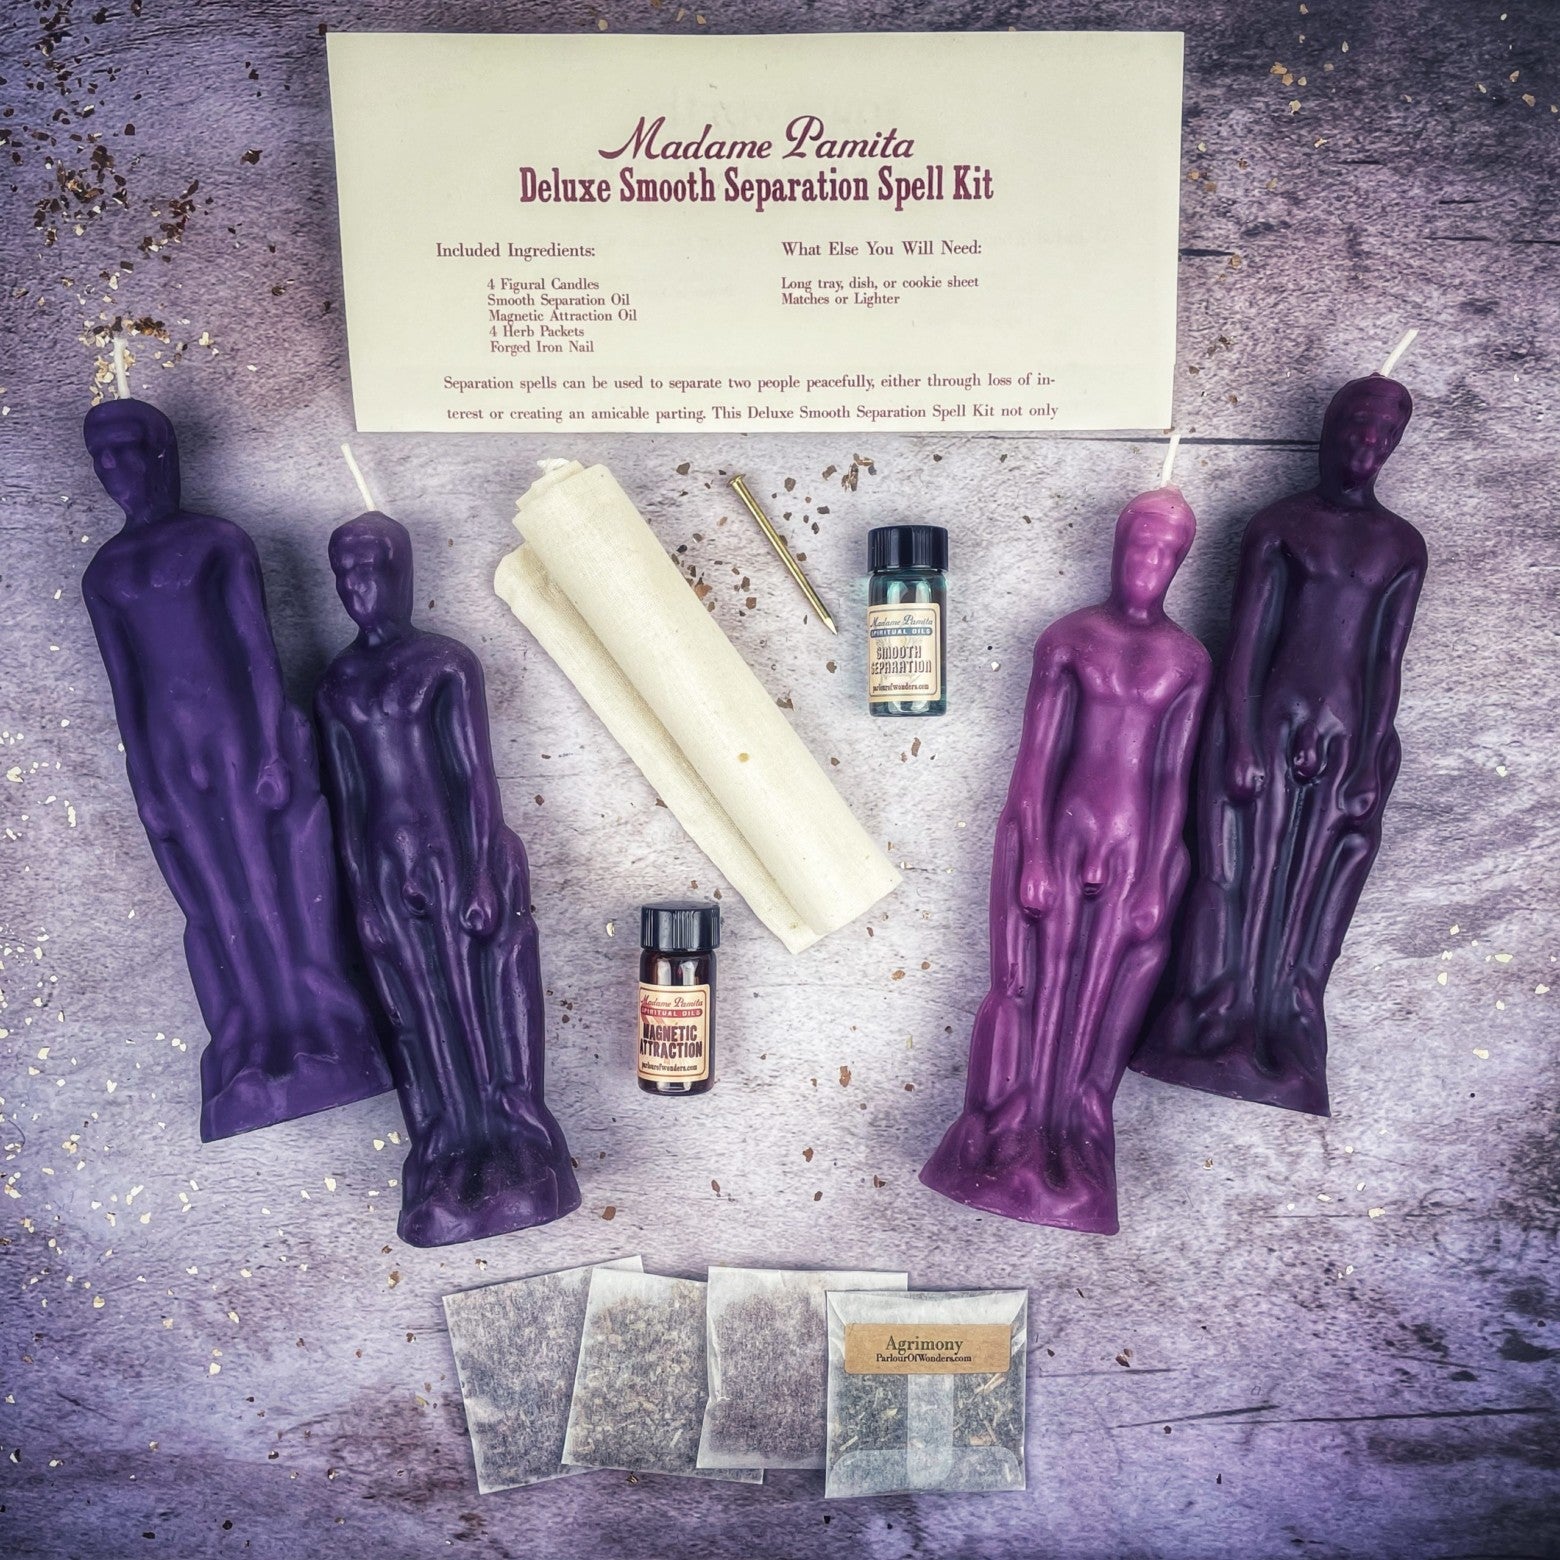 Deluxe Smooth Separation Candle Spell Kit - Male/Male